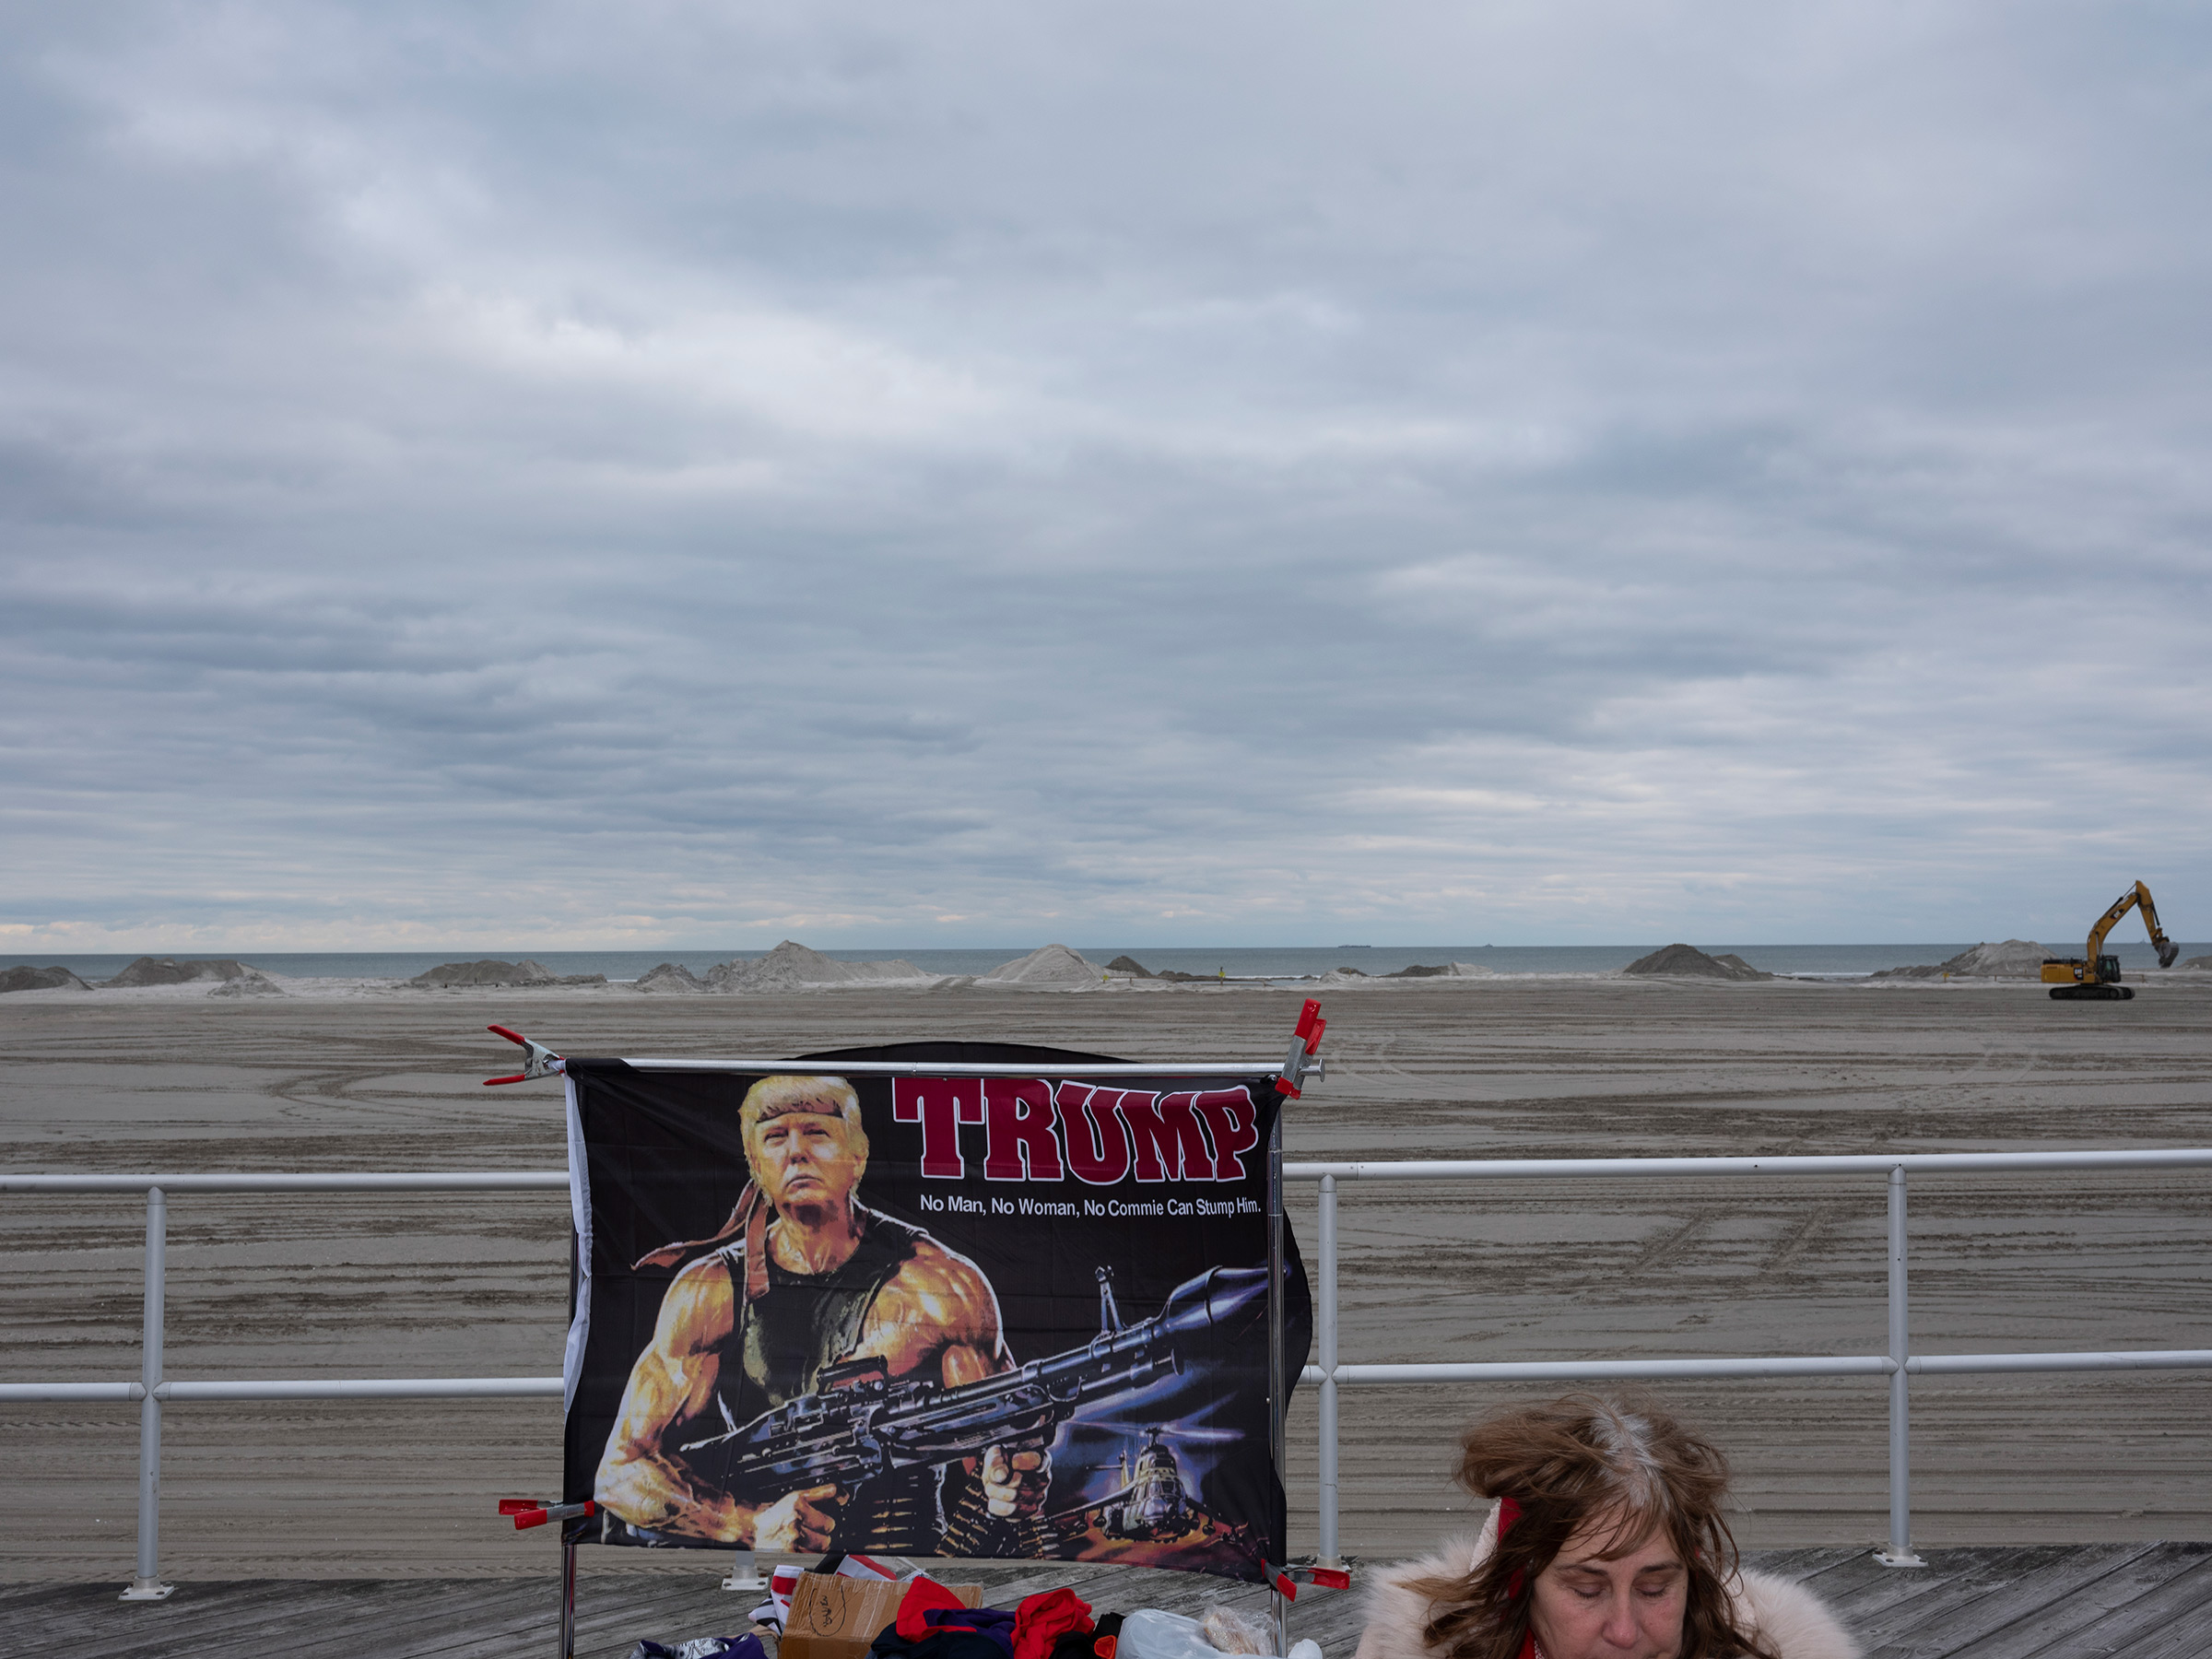 <strong>Wildwood, N.J., Jan. 28, 2020.</strong> A vendor sells Trump merchandise outside a rally. (Peter van Agtmael—Magnum Photos for TIME)